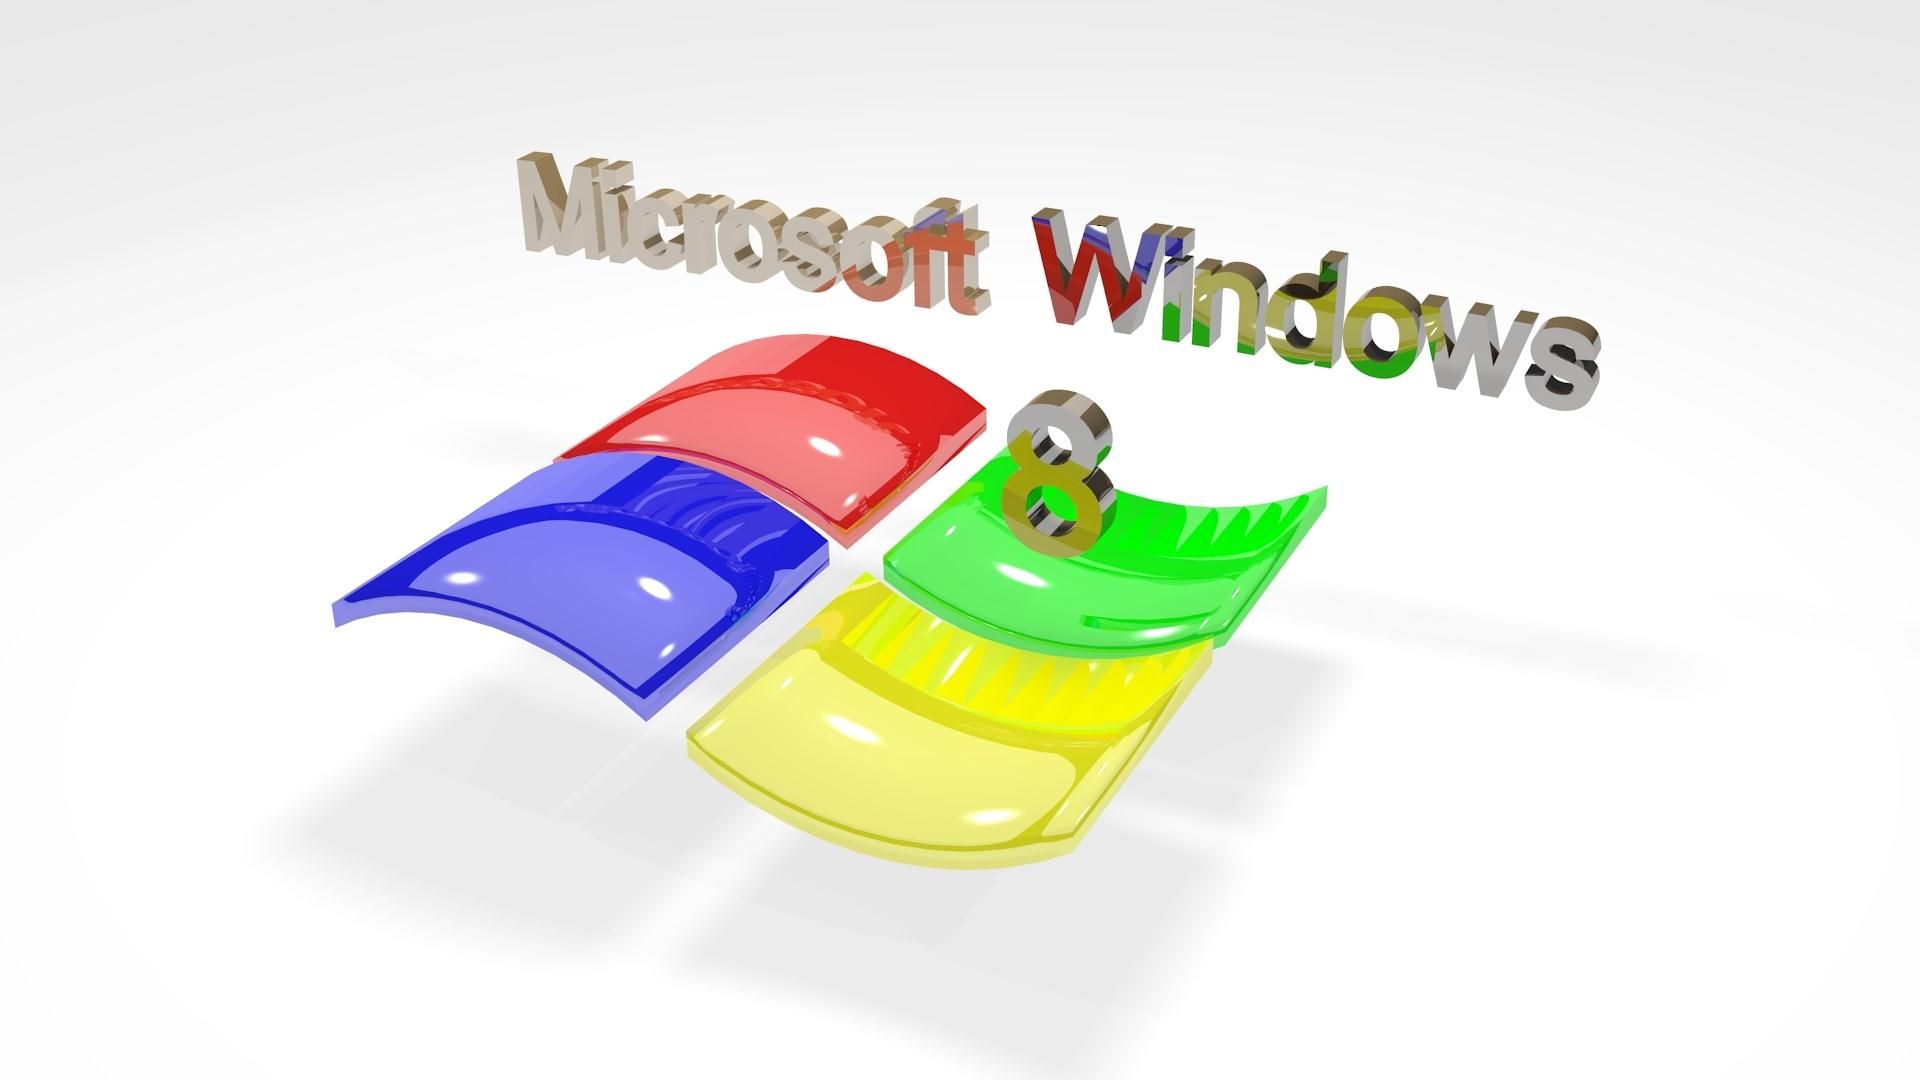 Microsoft Windows 3d Wallpaper Wallpapers, Backgrounds, Images